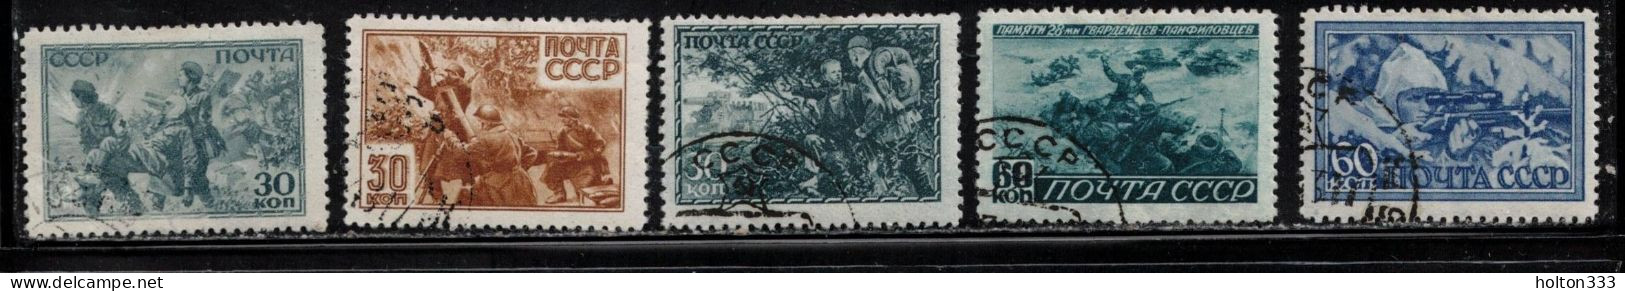 RUSSIA Scott # 890-4 Used - Soldiers & Military Scenes - Usados